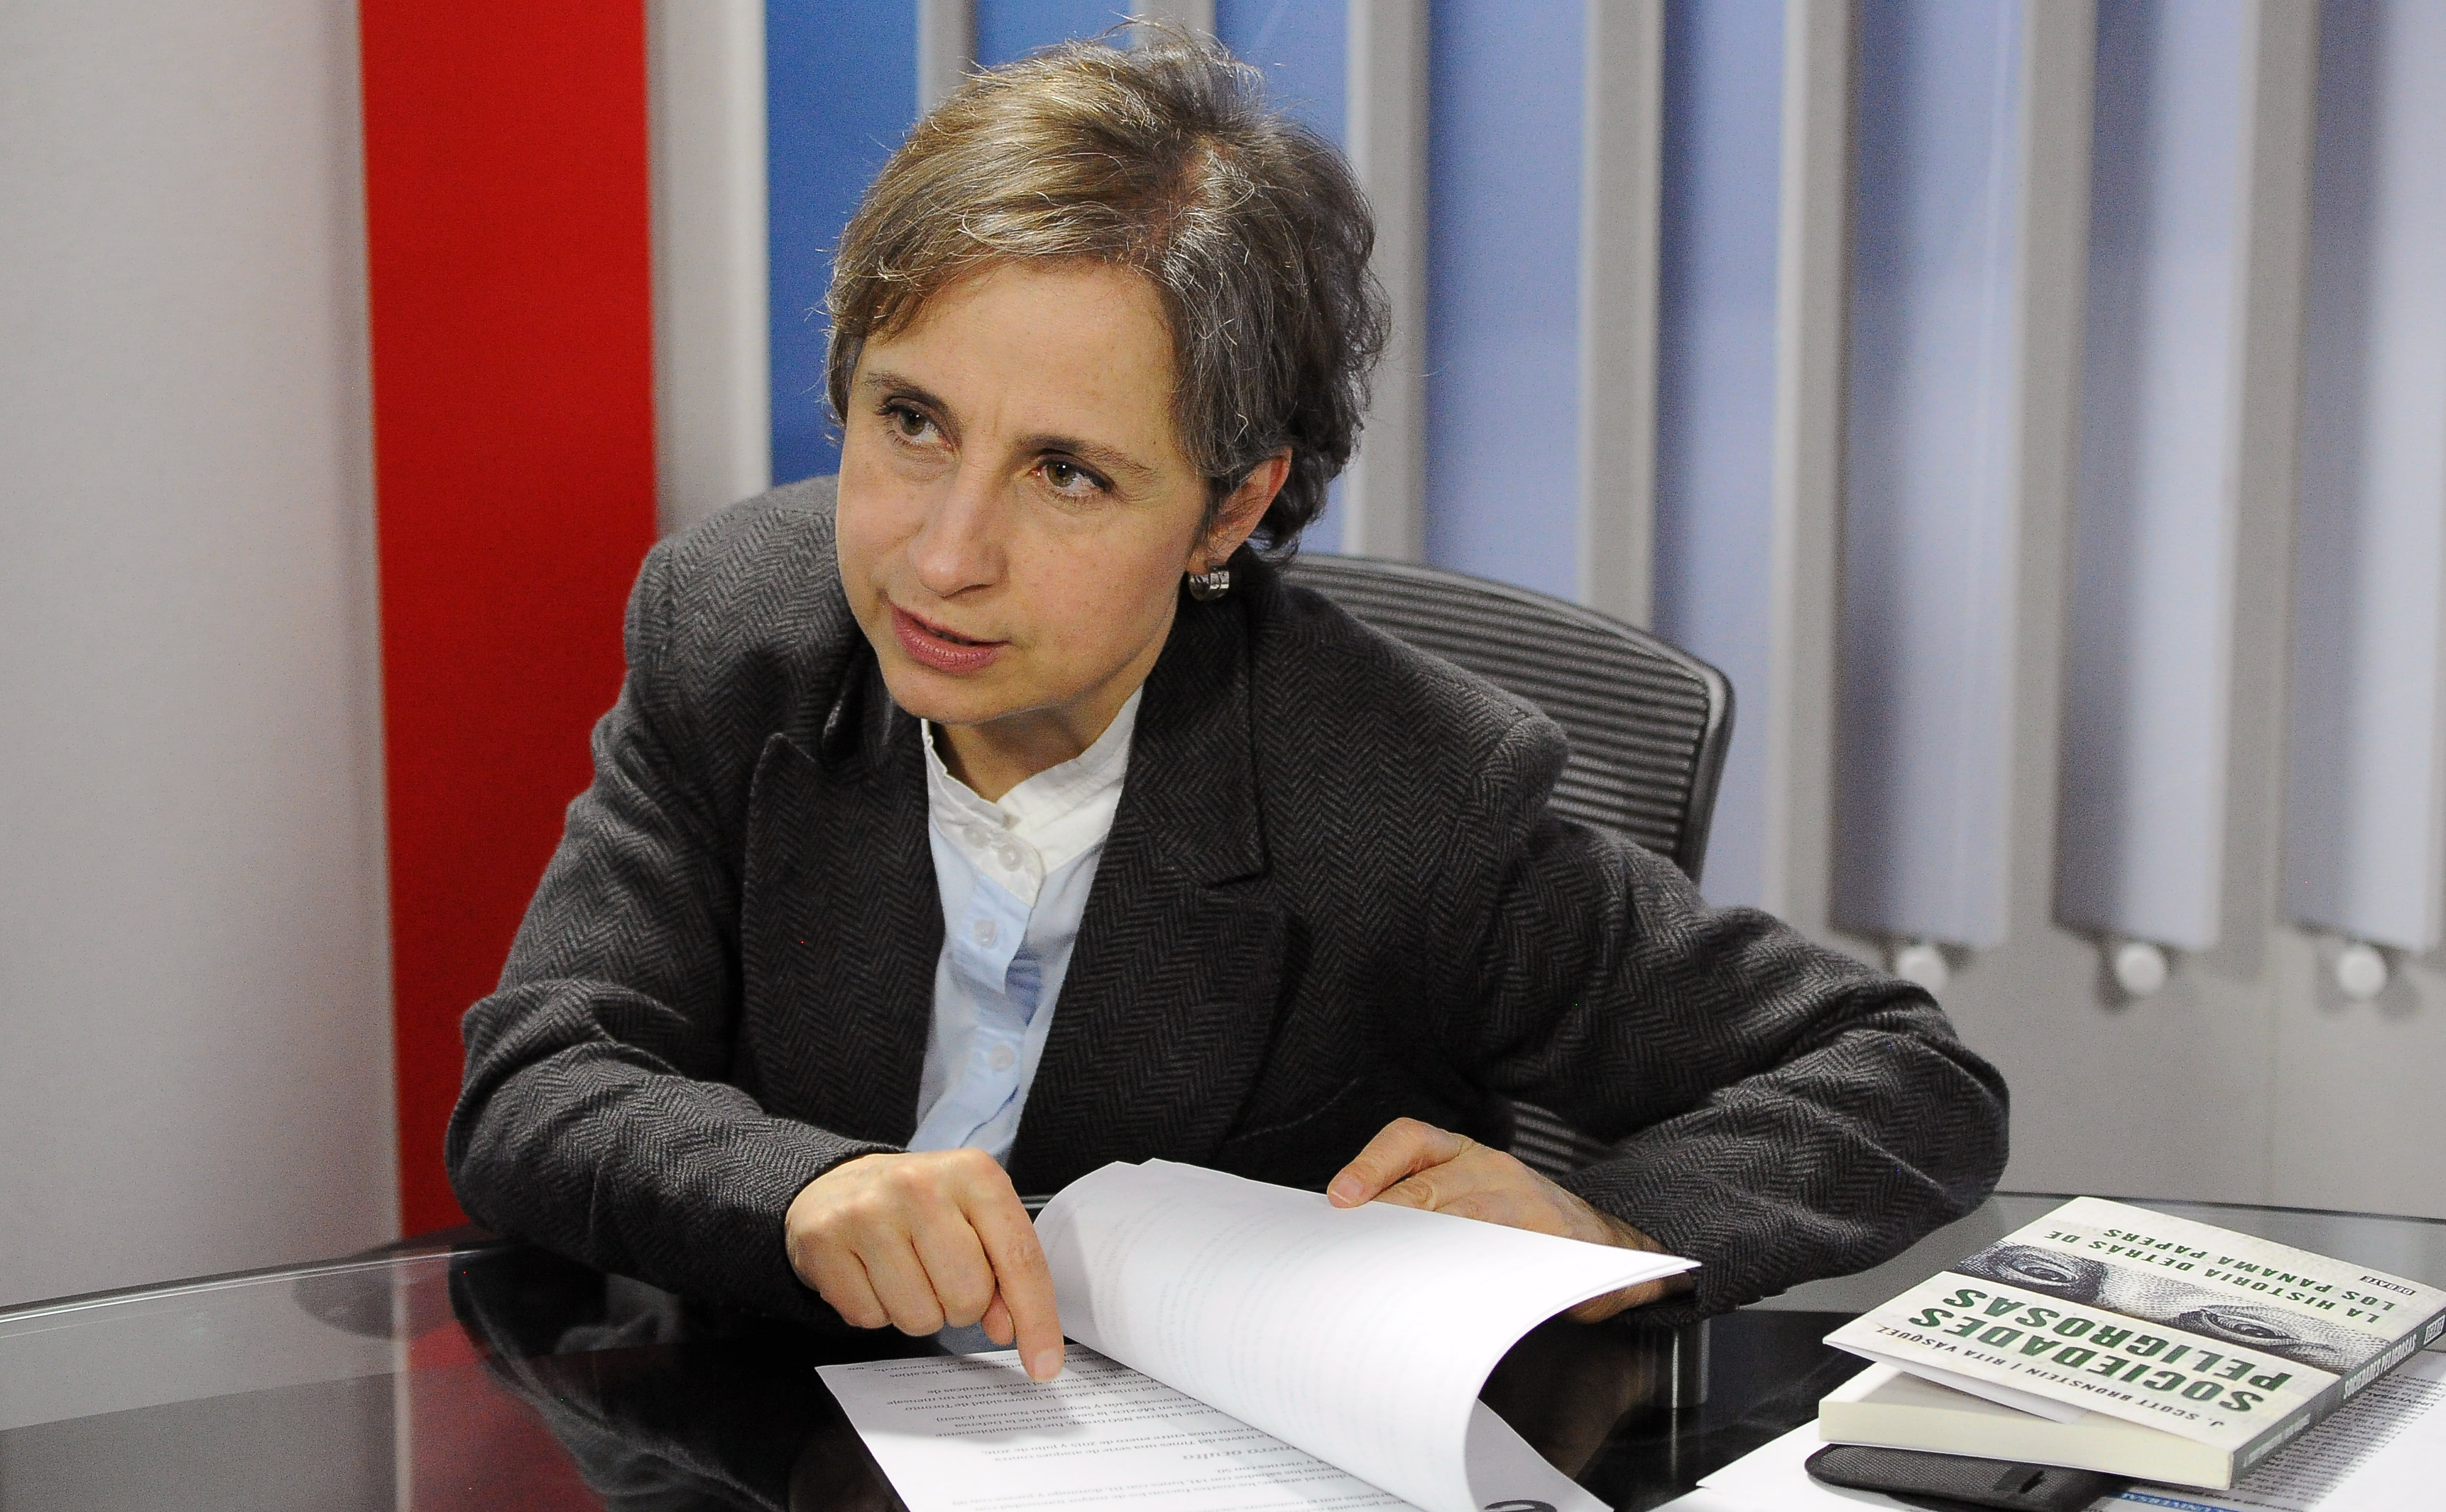 Mexican journalist Carmen Aristegui speaks during an interview with AFP about the New York Times article "Using Texts as Lures, Government Spyware Targets Mexican Journalists and Their Families", in Mexico City on June 22, 2017.
Mexican prosecutors said Wednesday they have opened an investigation into allegations the government spied on leading journalists, human rights activists and anti-corruption campaigners. / AFP PHOTO / BERNARDO MONTOYA        (Photo credit should read BERNARDO MONTOYA/AFP/Getty Images)